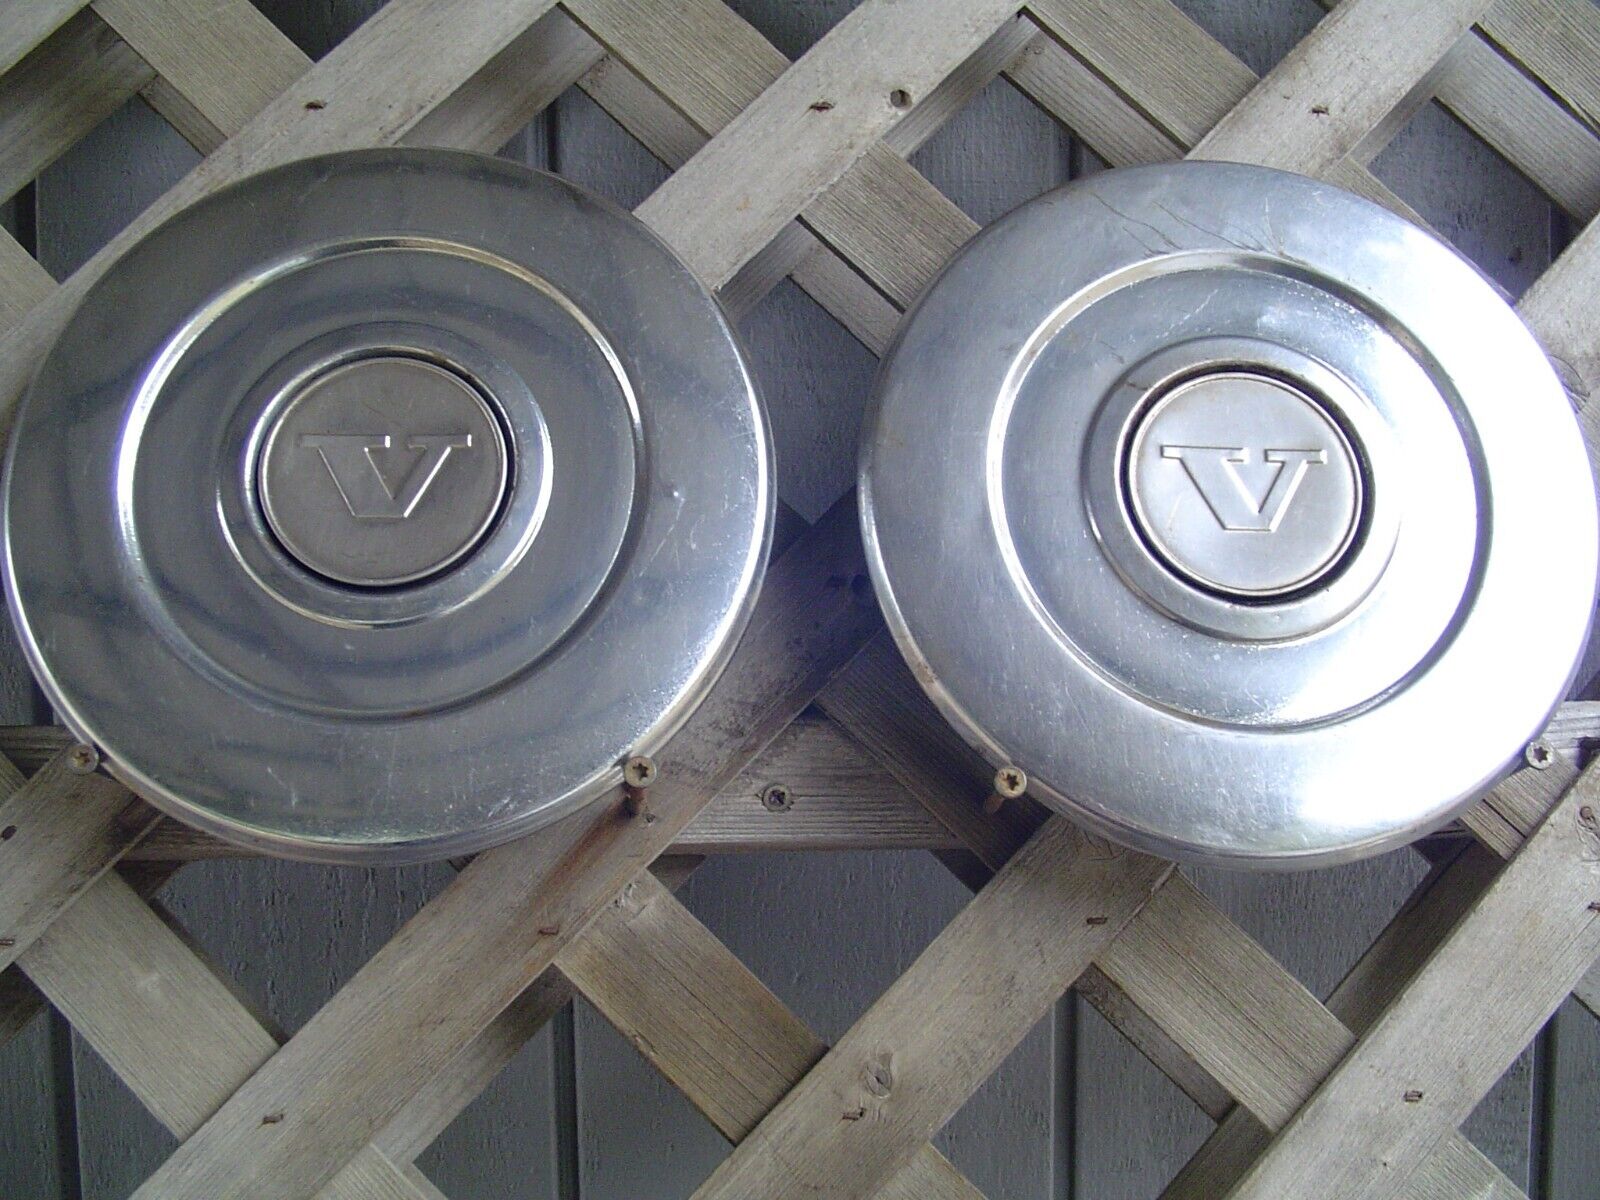 TWO VINTAGE 1980 81 82 83 84 1985 VOLVO 240 DL CENTER CAPS HUBCAPS WHEEL COVERS